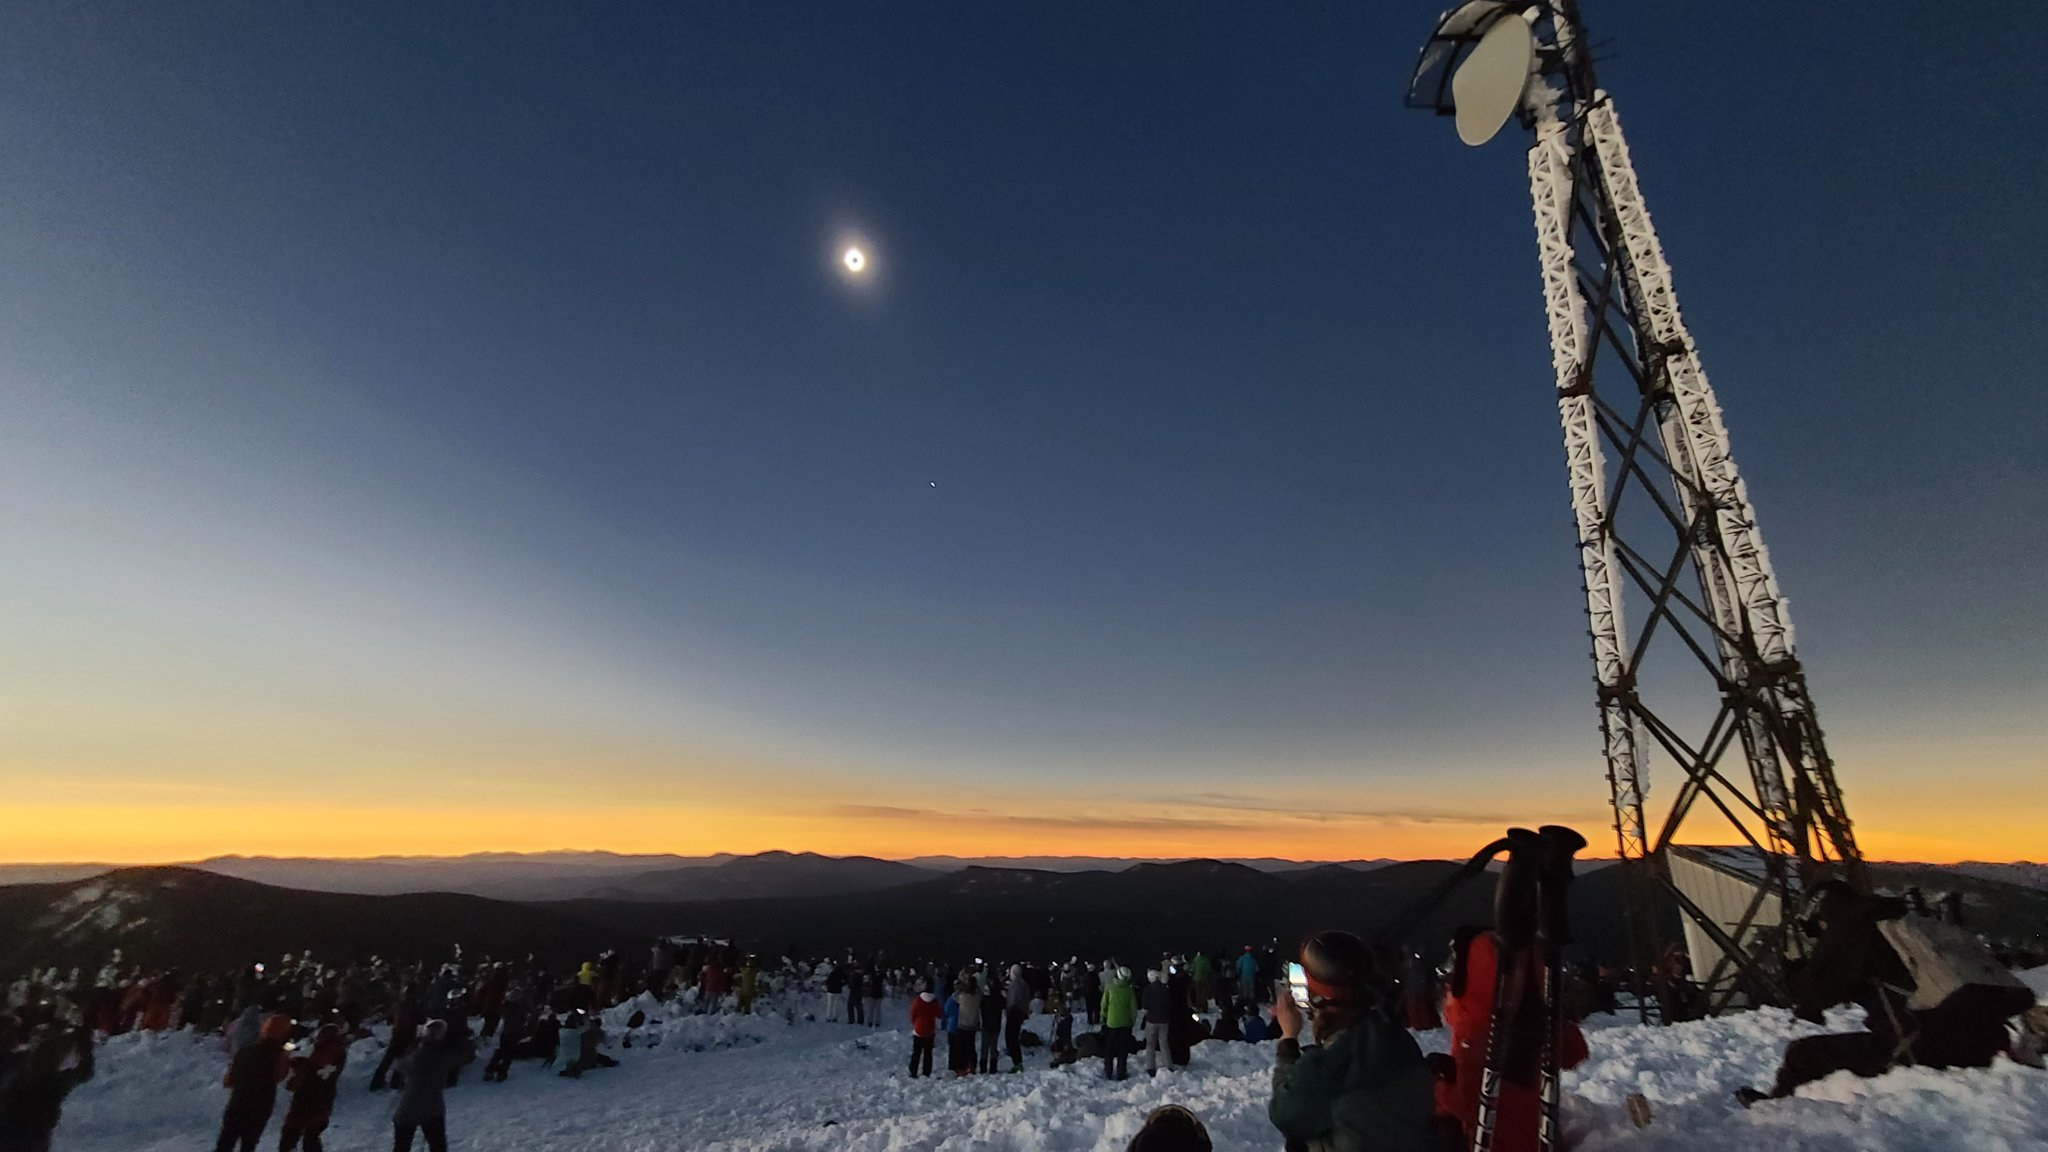 unique views of the solar eclipse you may have missed